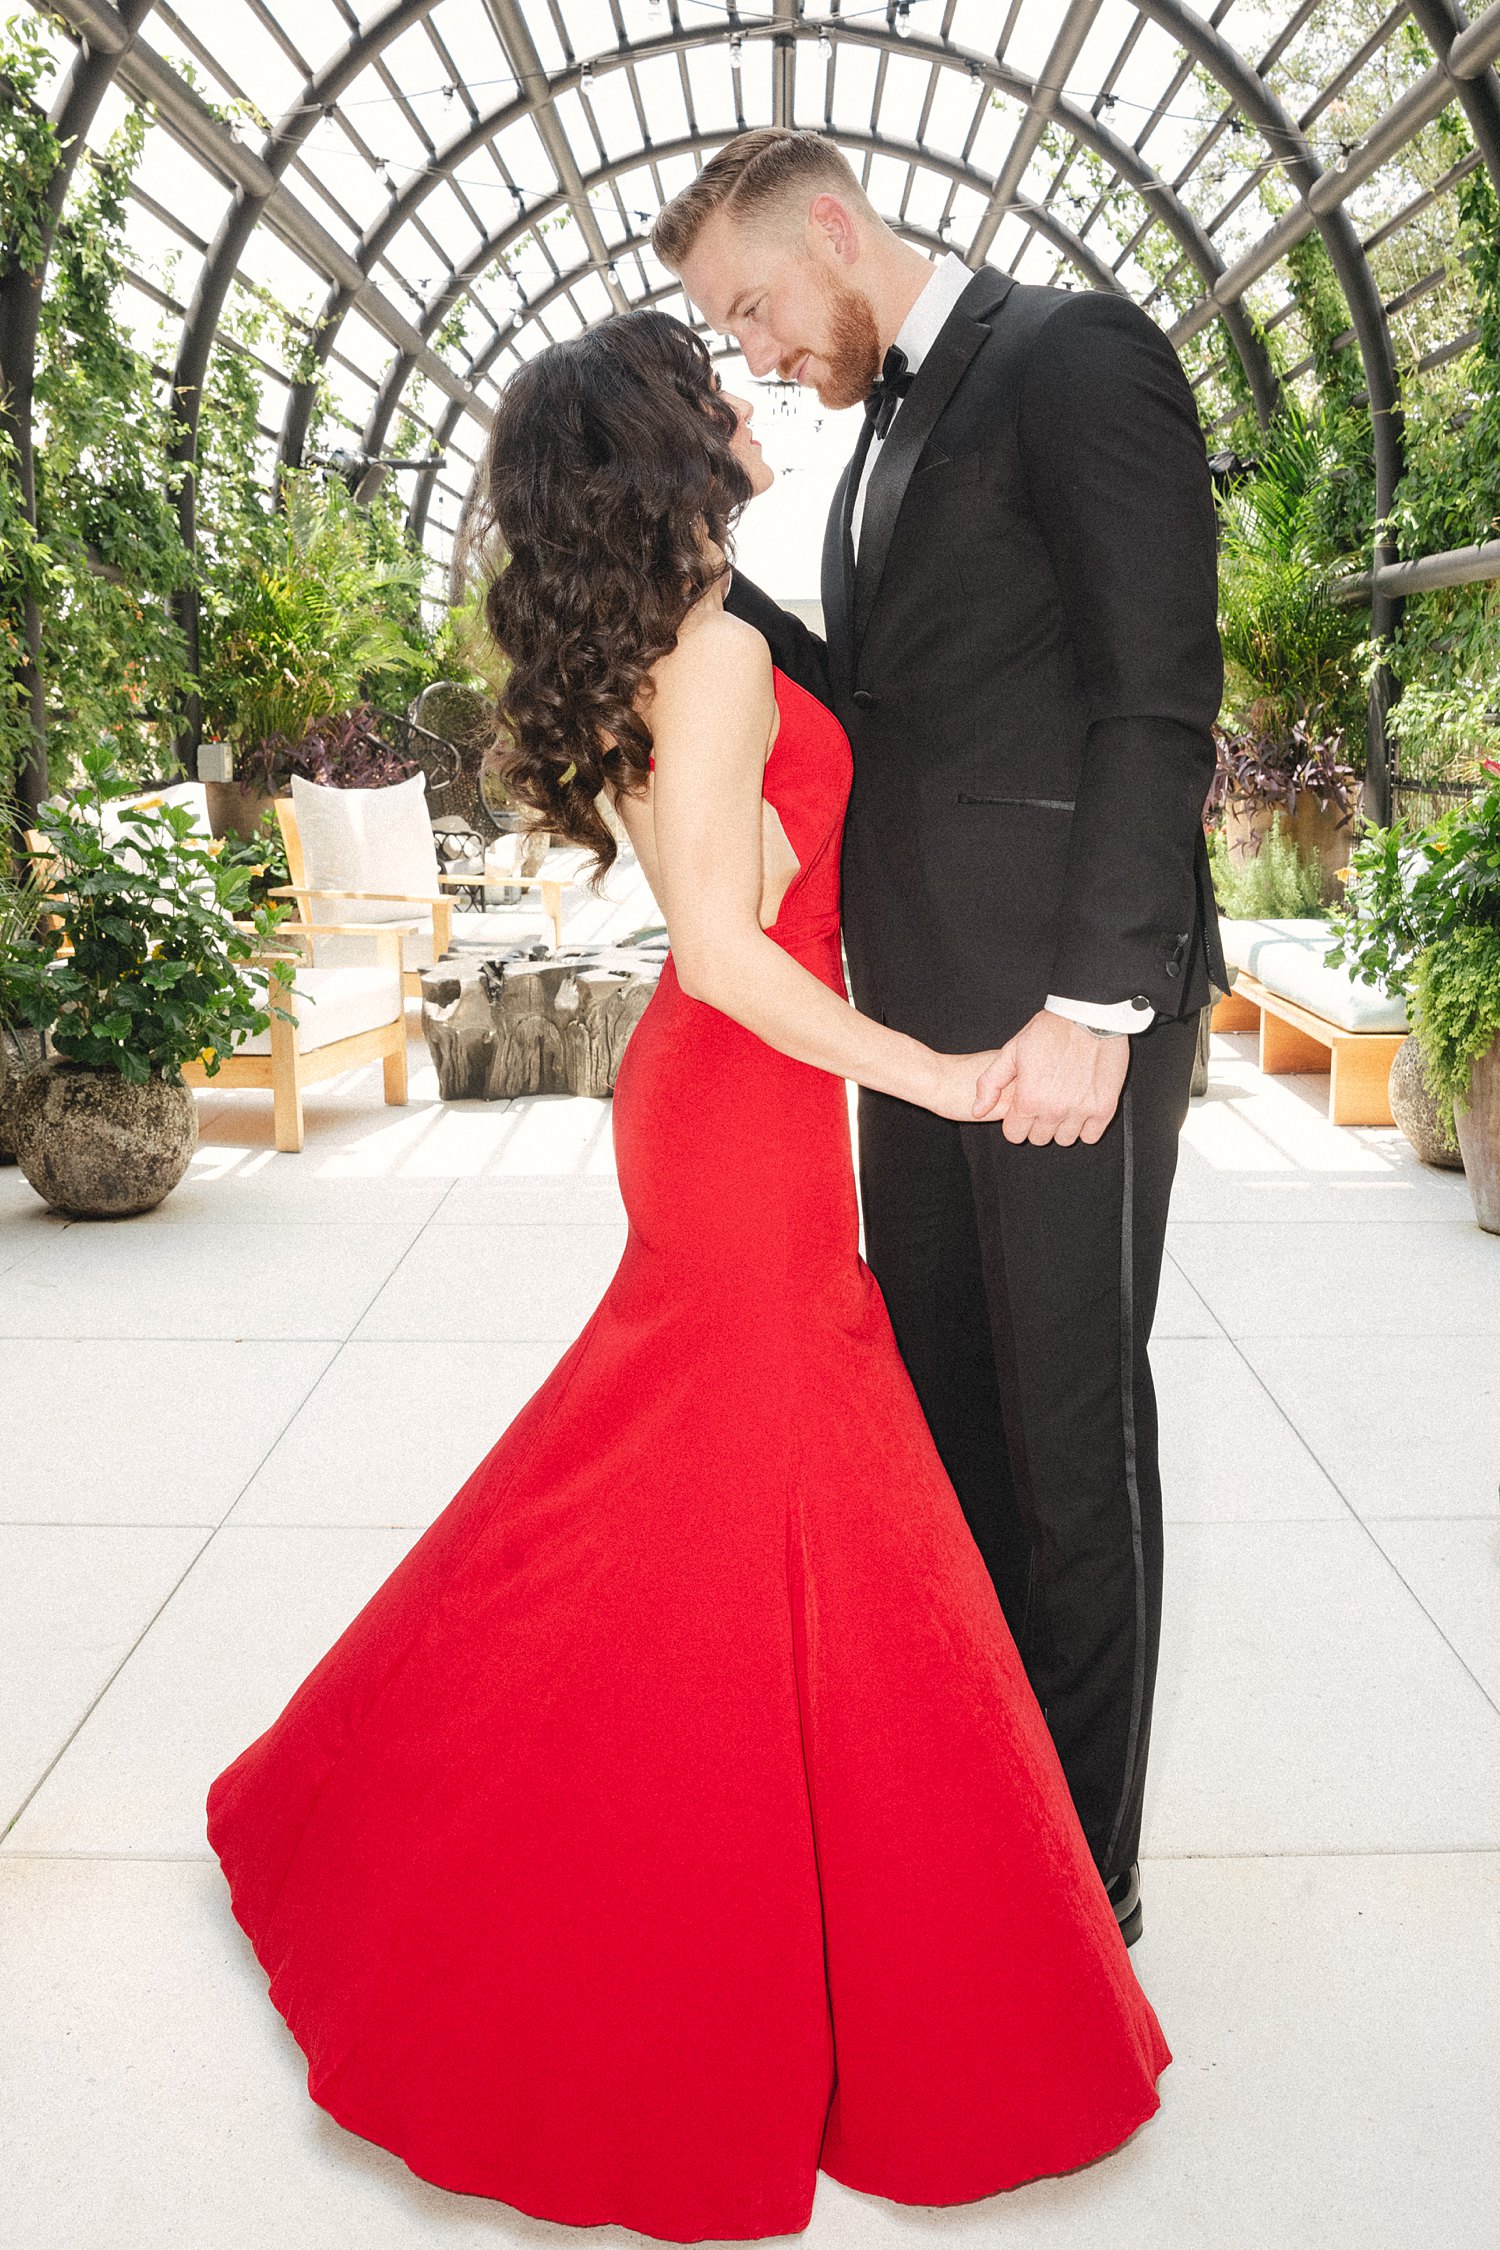 Woman in red Dress standing with man in black tuxedo by outdoor garden